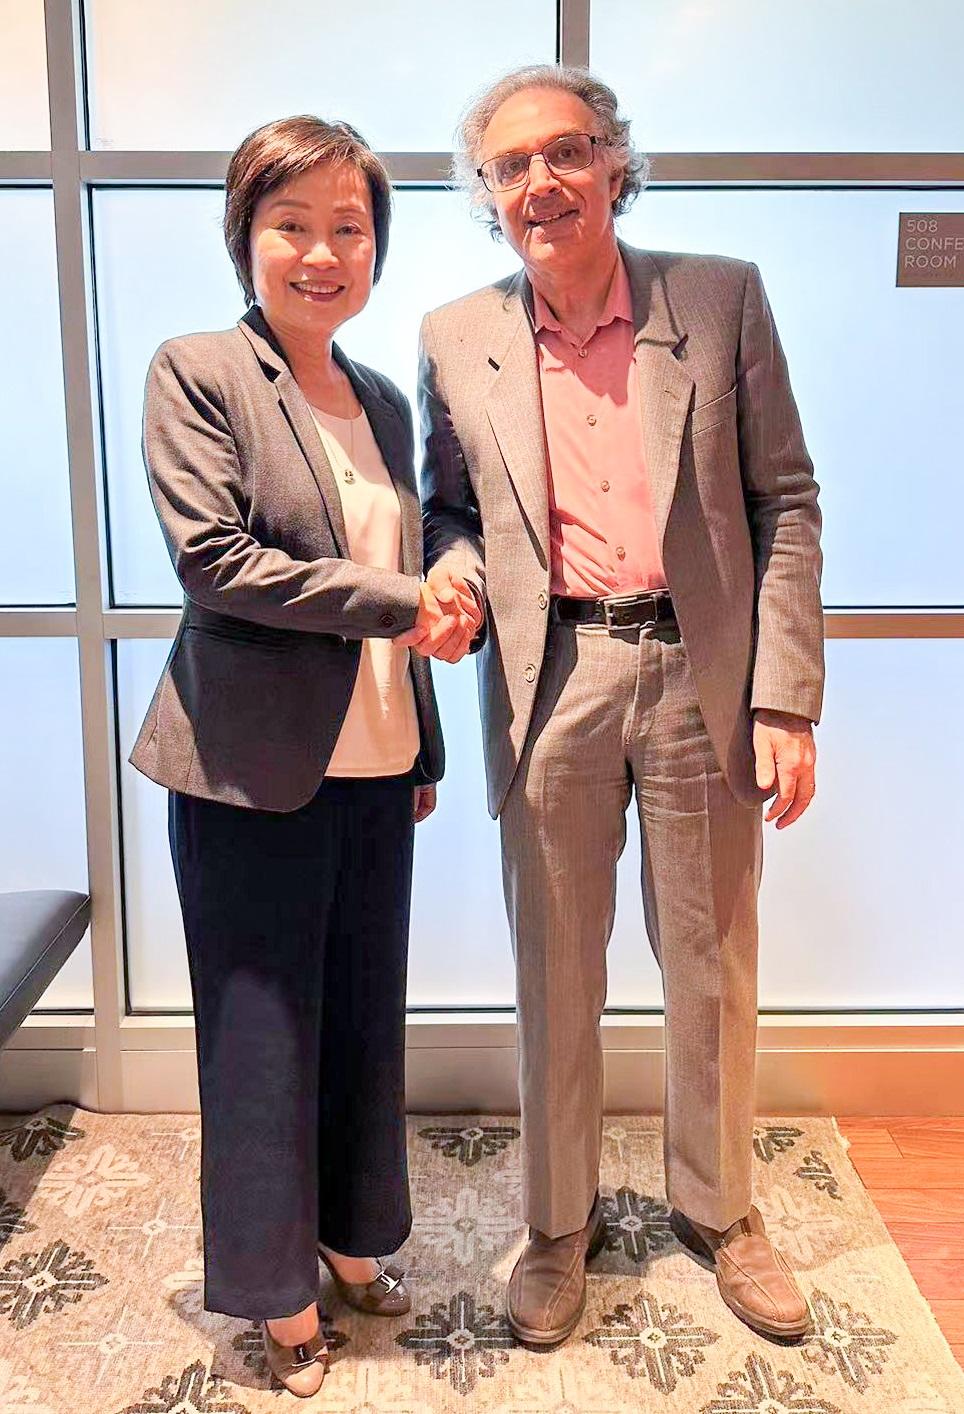 The Secretary for Education, Dr Choi Yuk-lin, visited the University of Chicago in the United States on May 28 (Chicago time). Photo shows Dr Choi (left) meeting the Faculty Director of the Hong Kong Campus of the University of Chicago, Professor Kenneth Pomeranz (right).